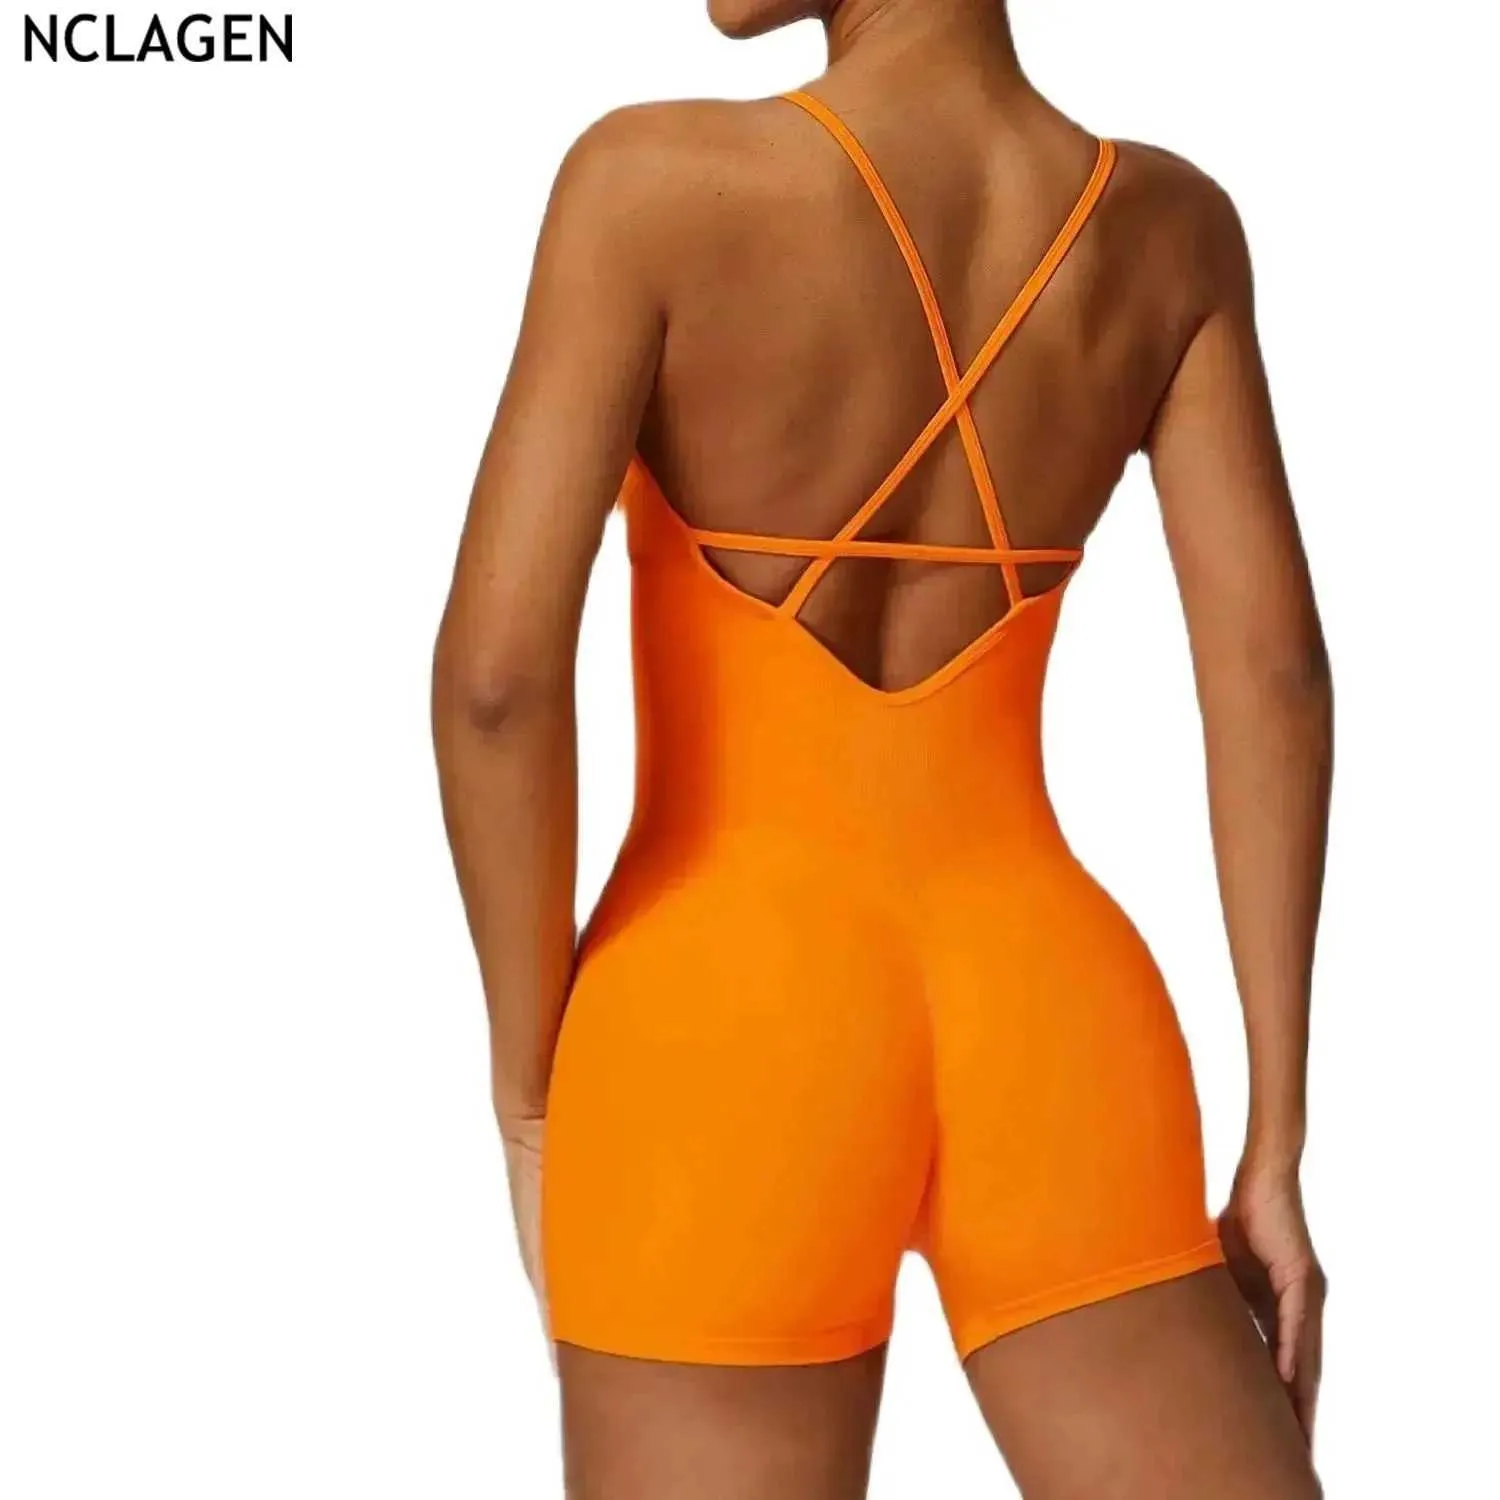 Women's Tracksuits NCLAGEN Fitness Seamless One Piece Yoga Tight Top Womens Open Back One Piece Sports Tight Top 240424